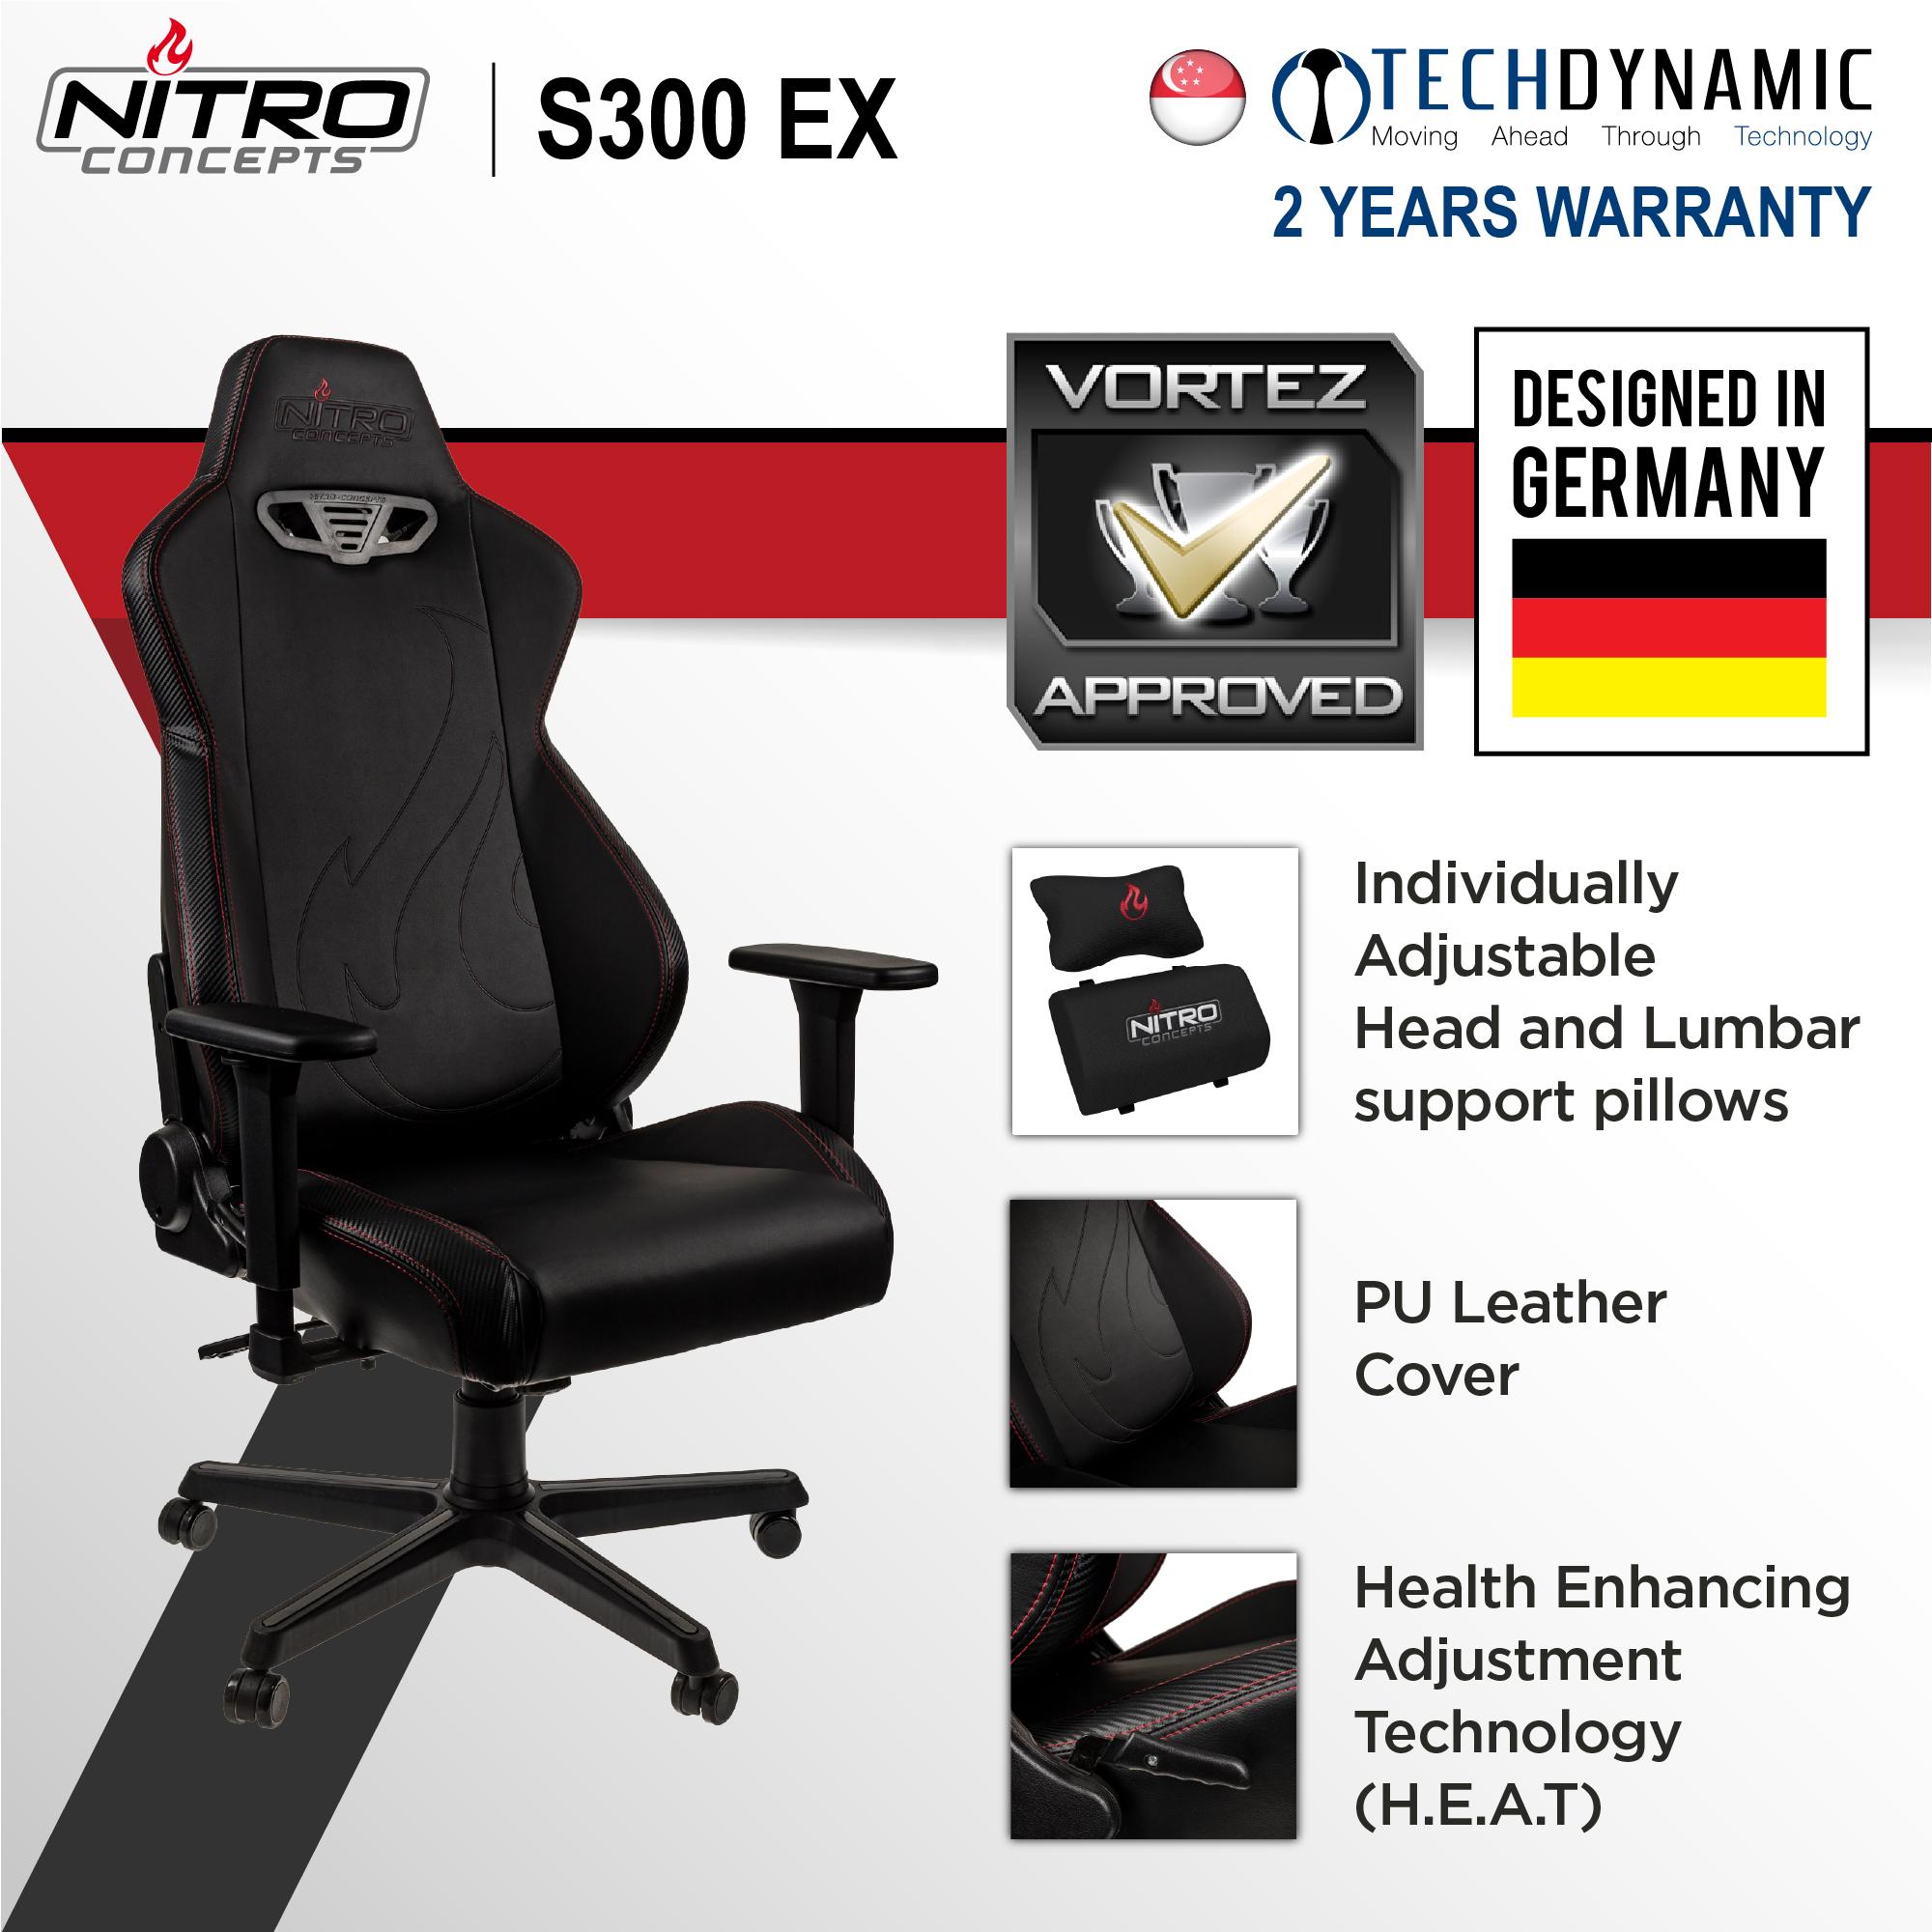 Nitro Concepts S300 Ex Gaming Chair Pu Leather Available In 4 Colors To Be Delivered Within 1 Week From Order Date Lazada Singapore